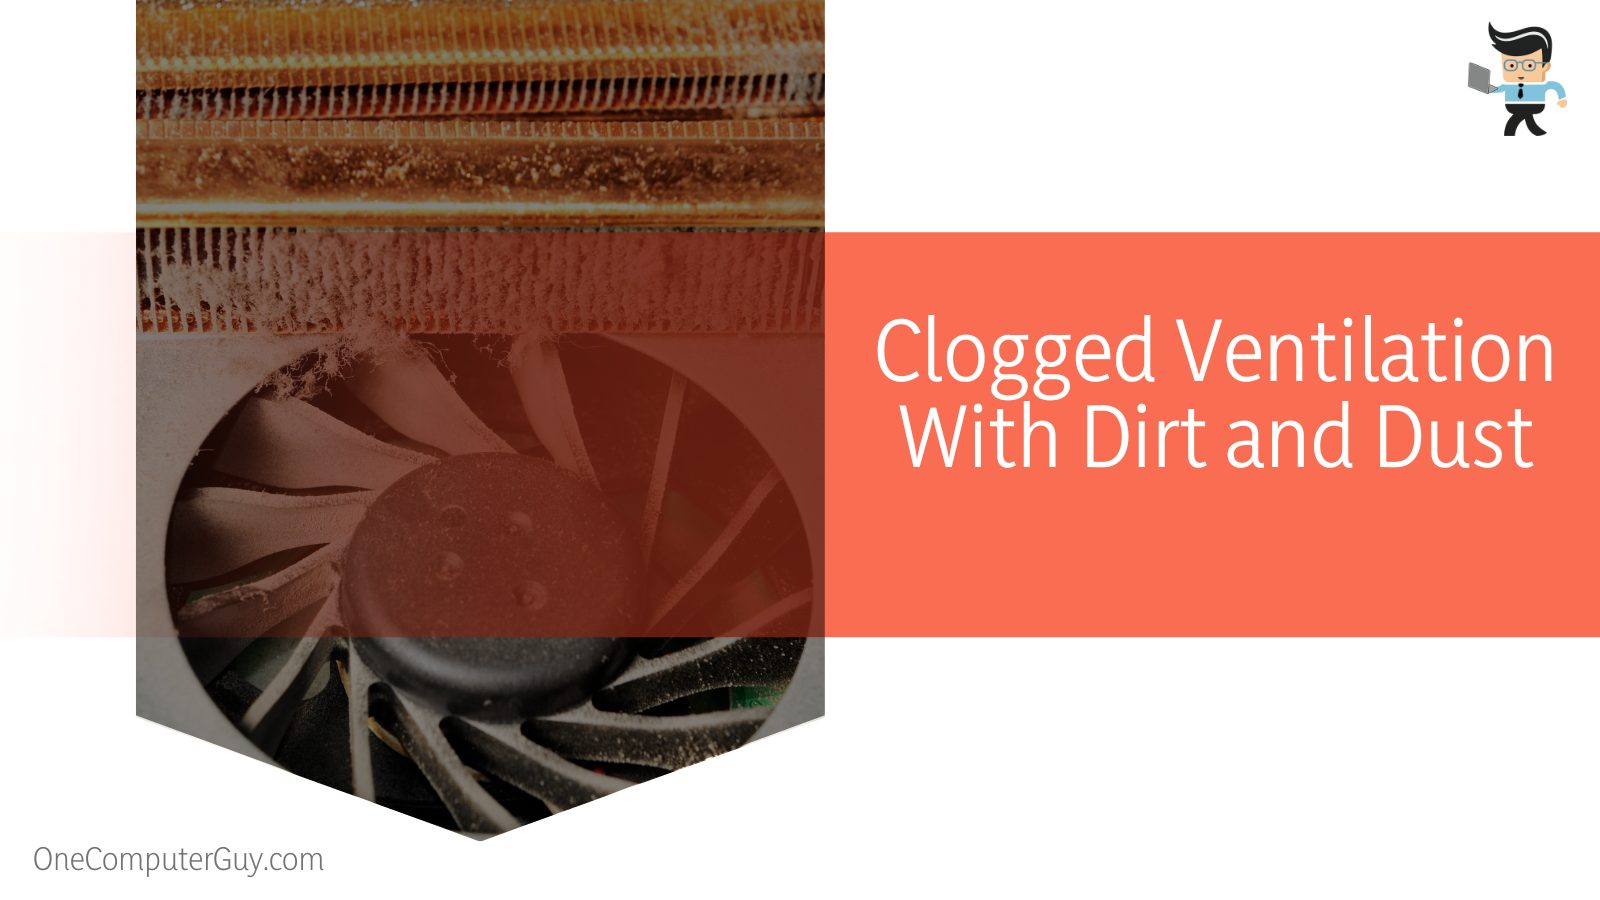 Clogged Ventilation With Dirt and Dust